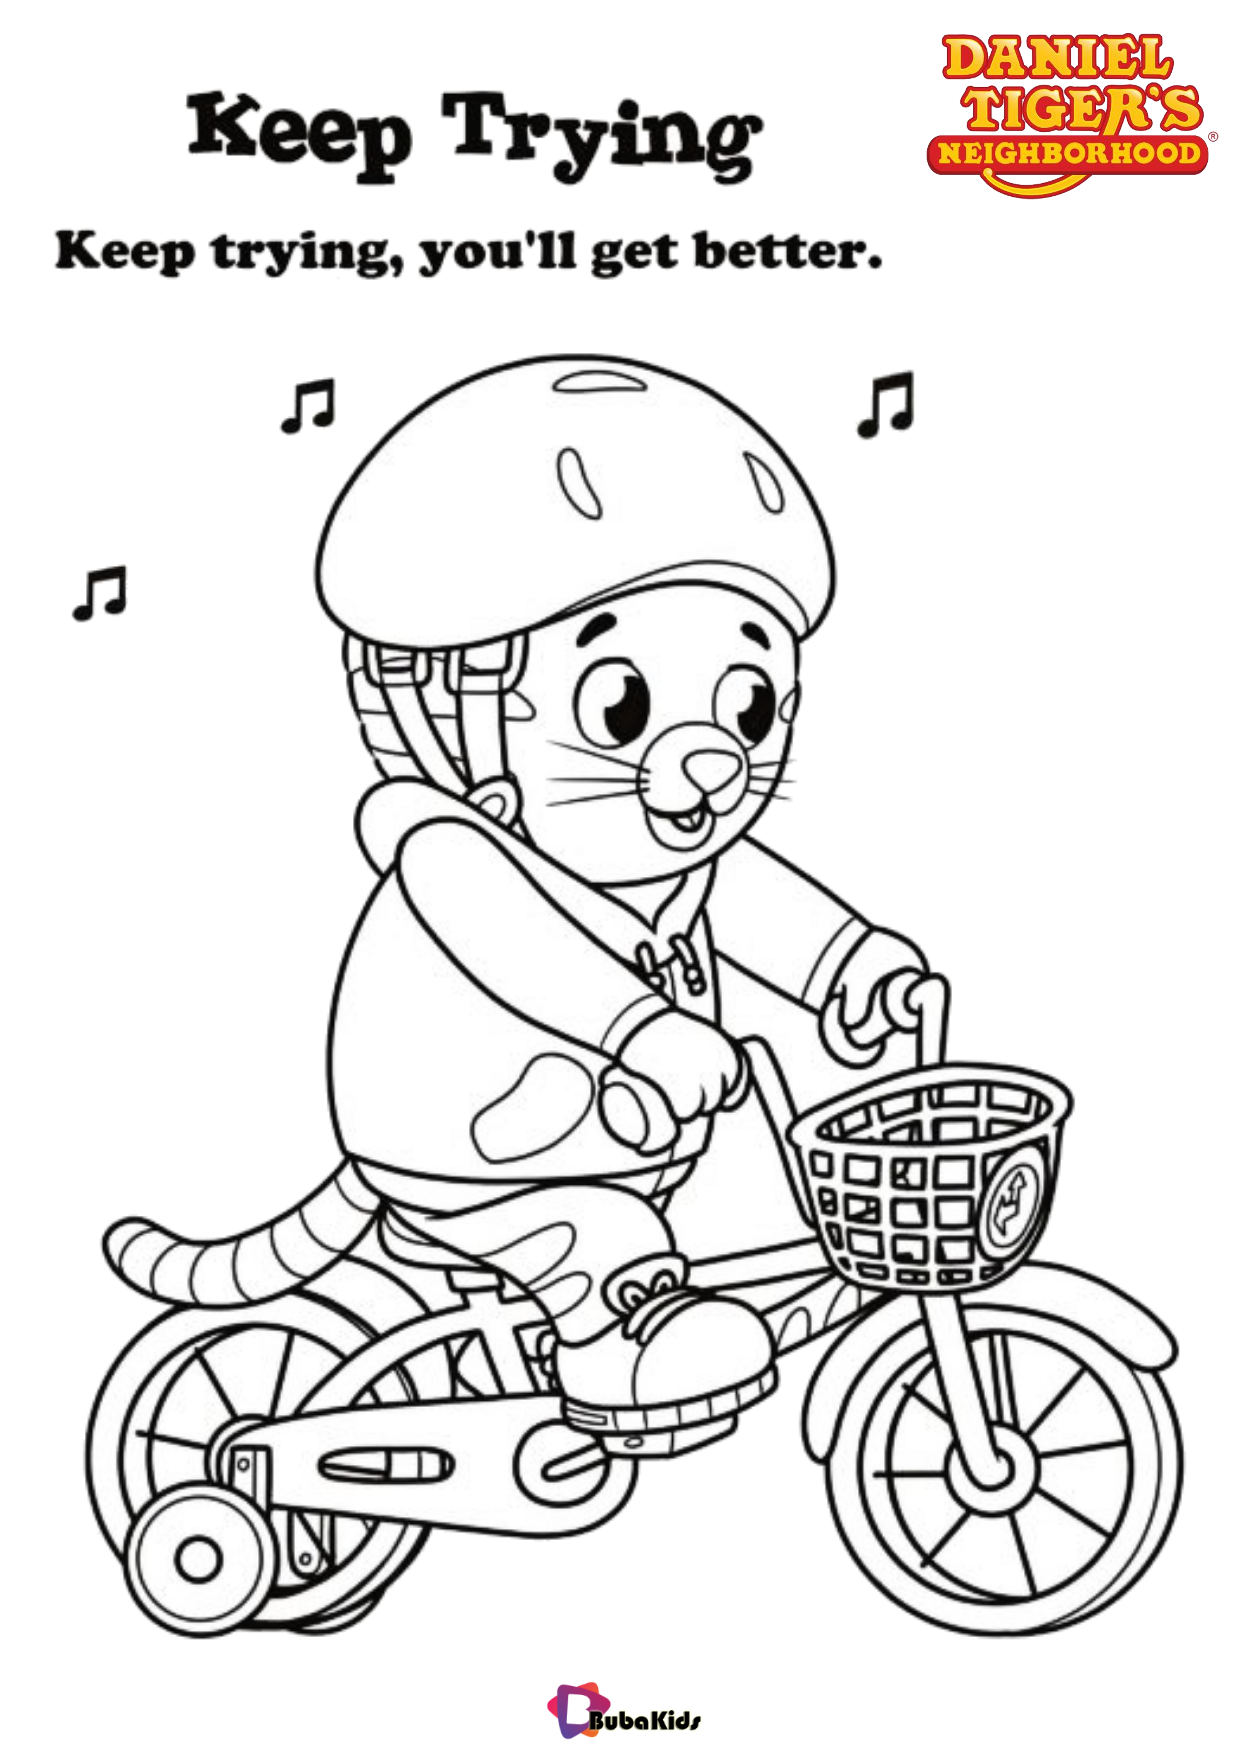 Daniel learns to ride a bike keep trying coloring pages Wallpaper